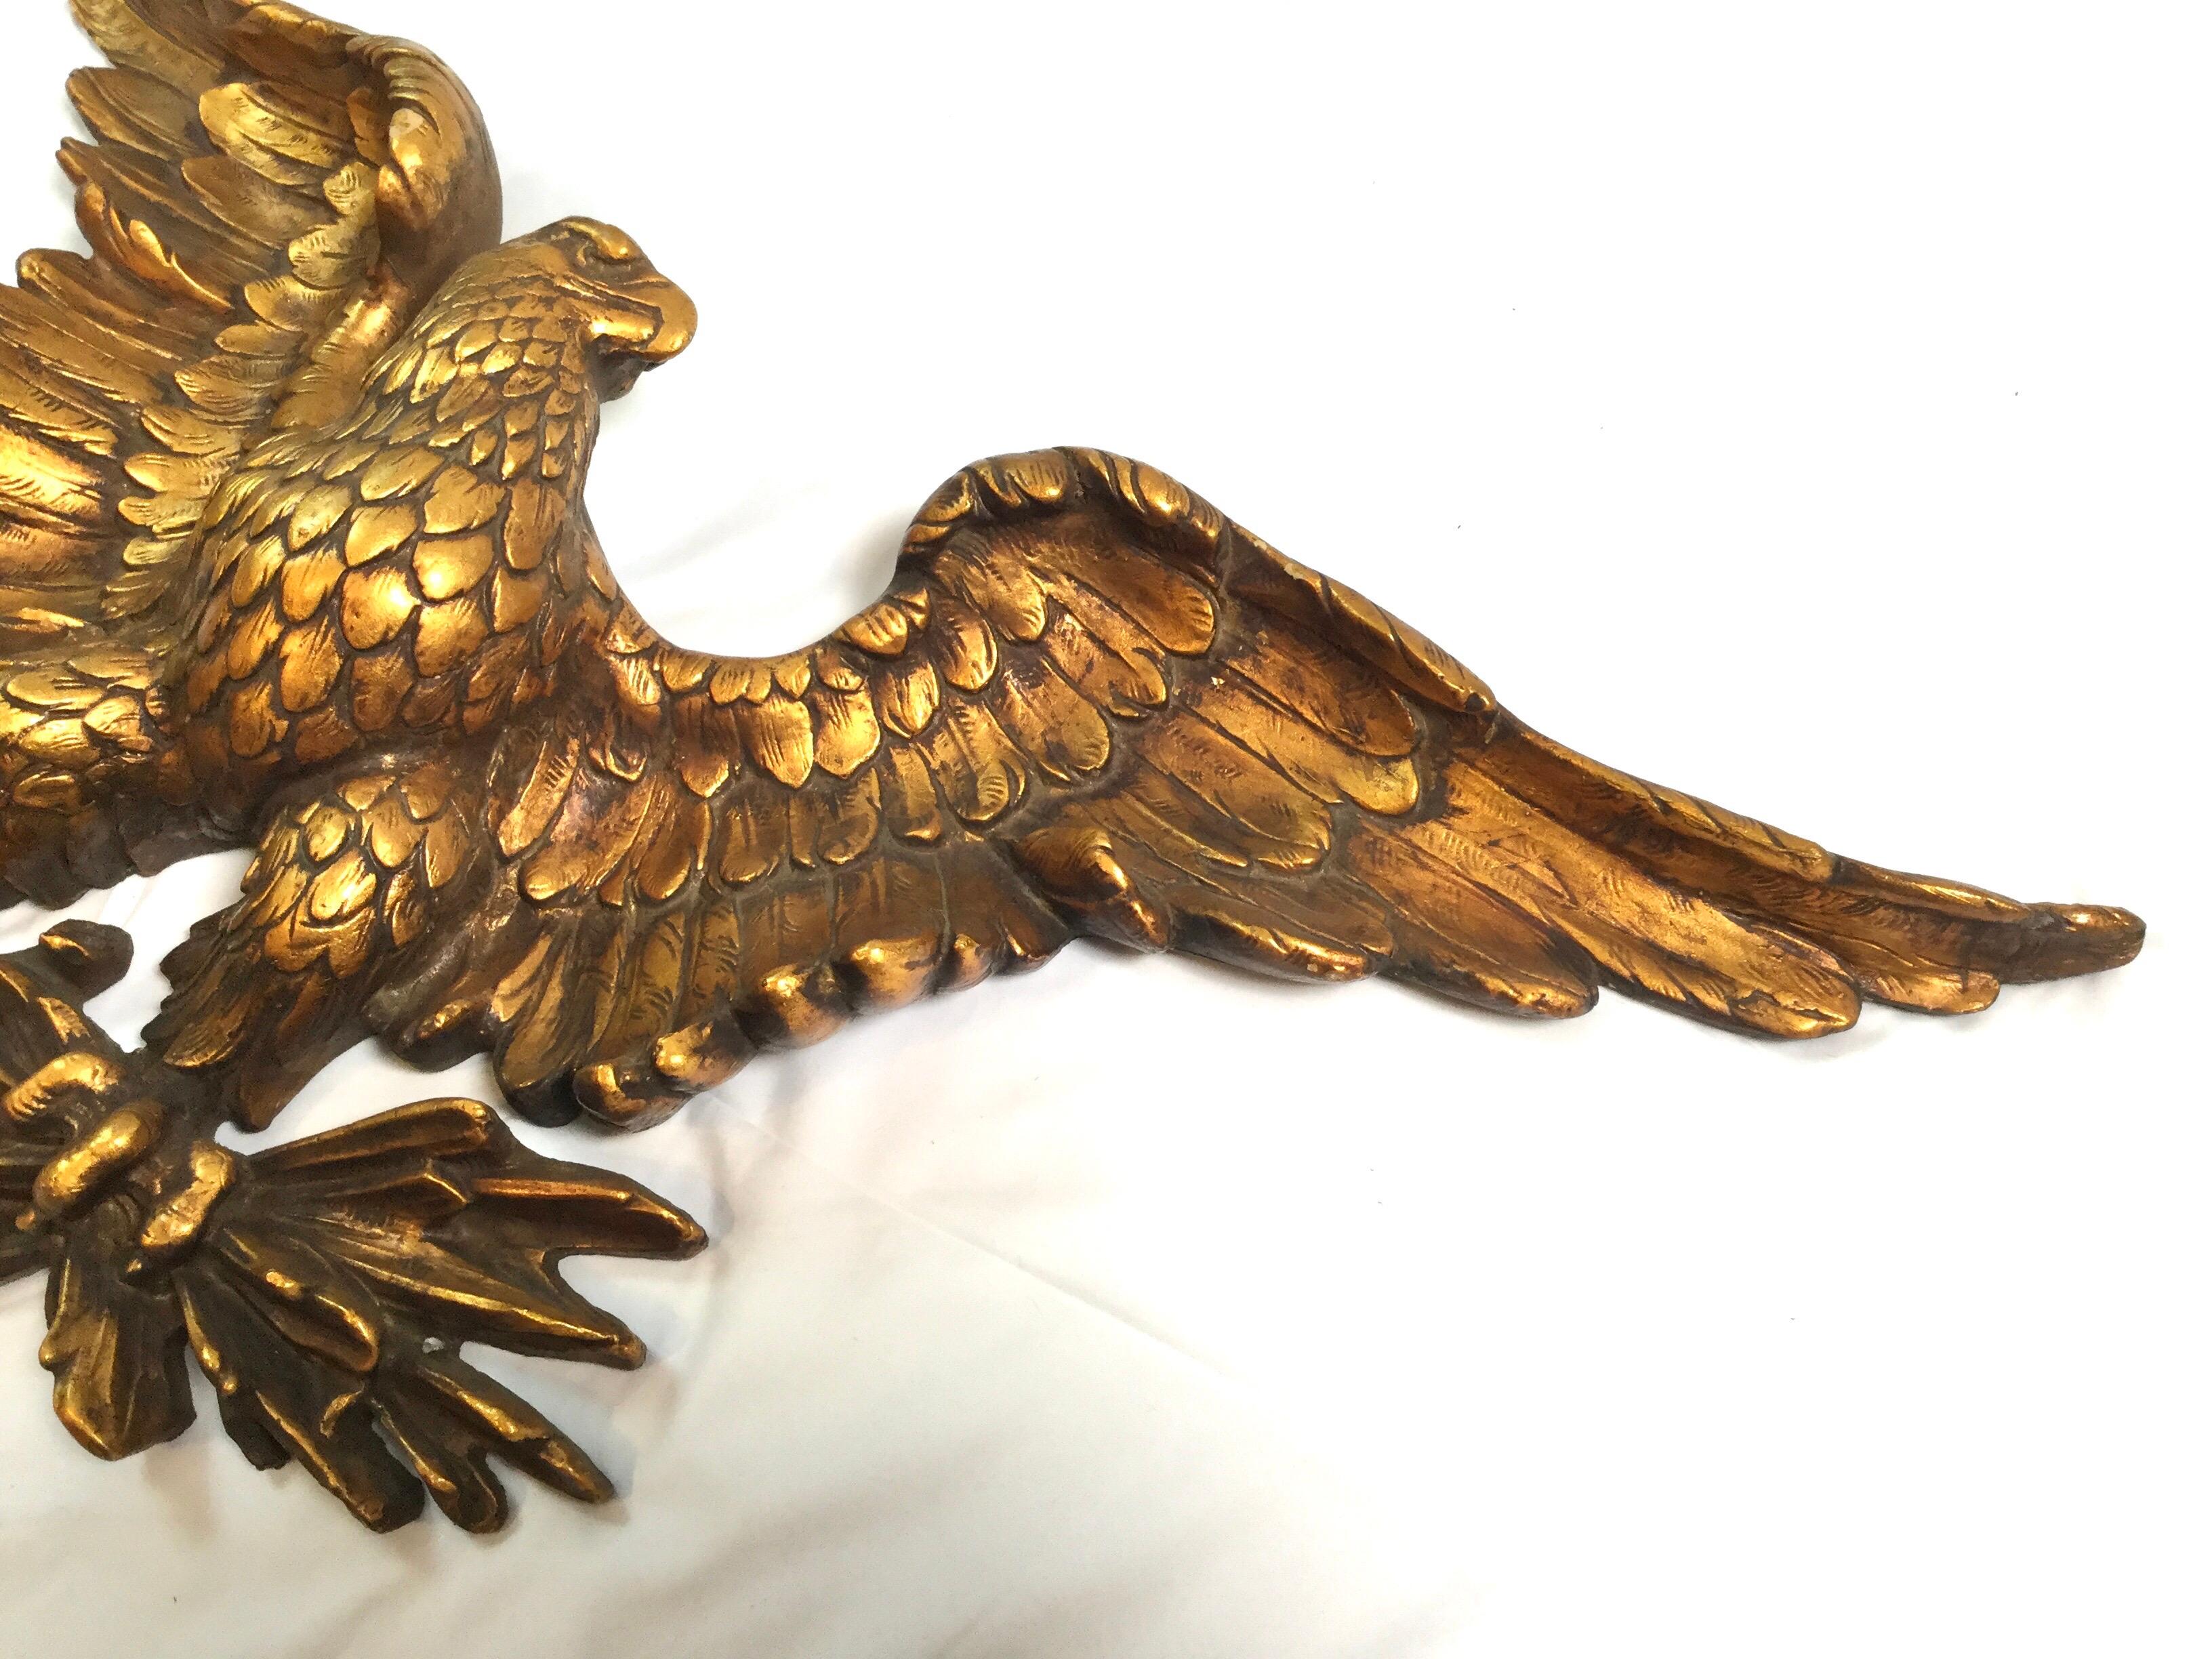 An aged gold American eagle wall sculpture circa 1950s. The eagle with spread wings in a partitive pose. High relief detail.